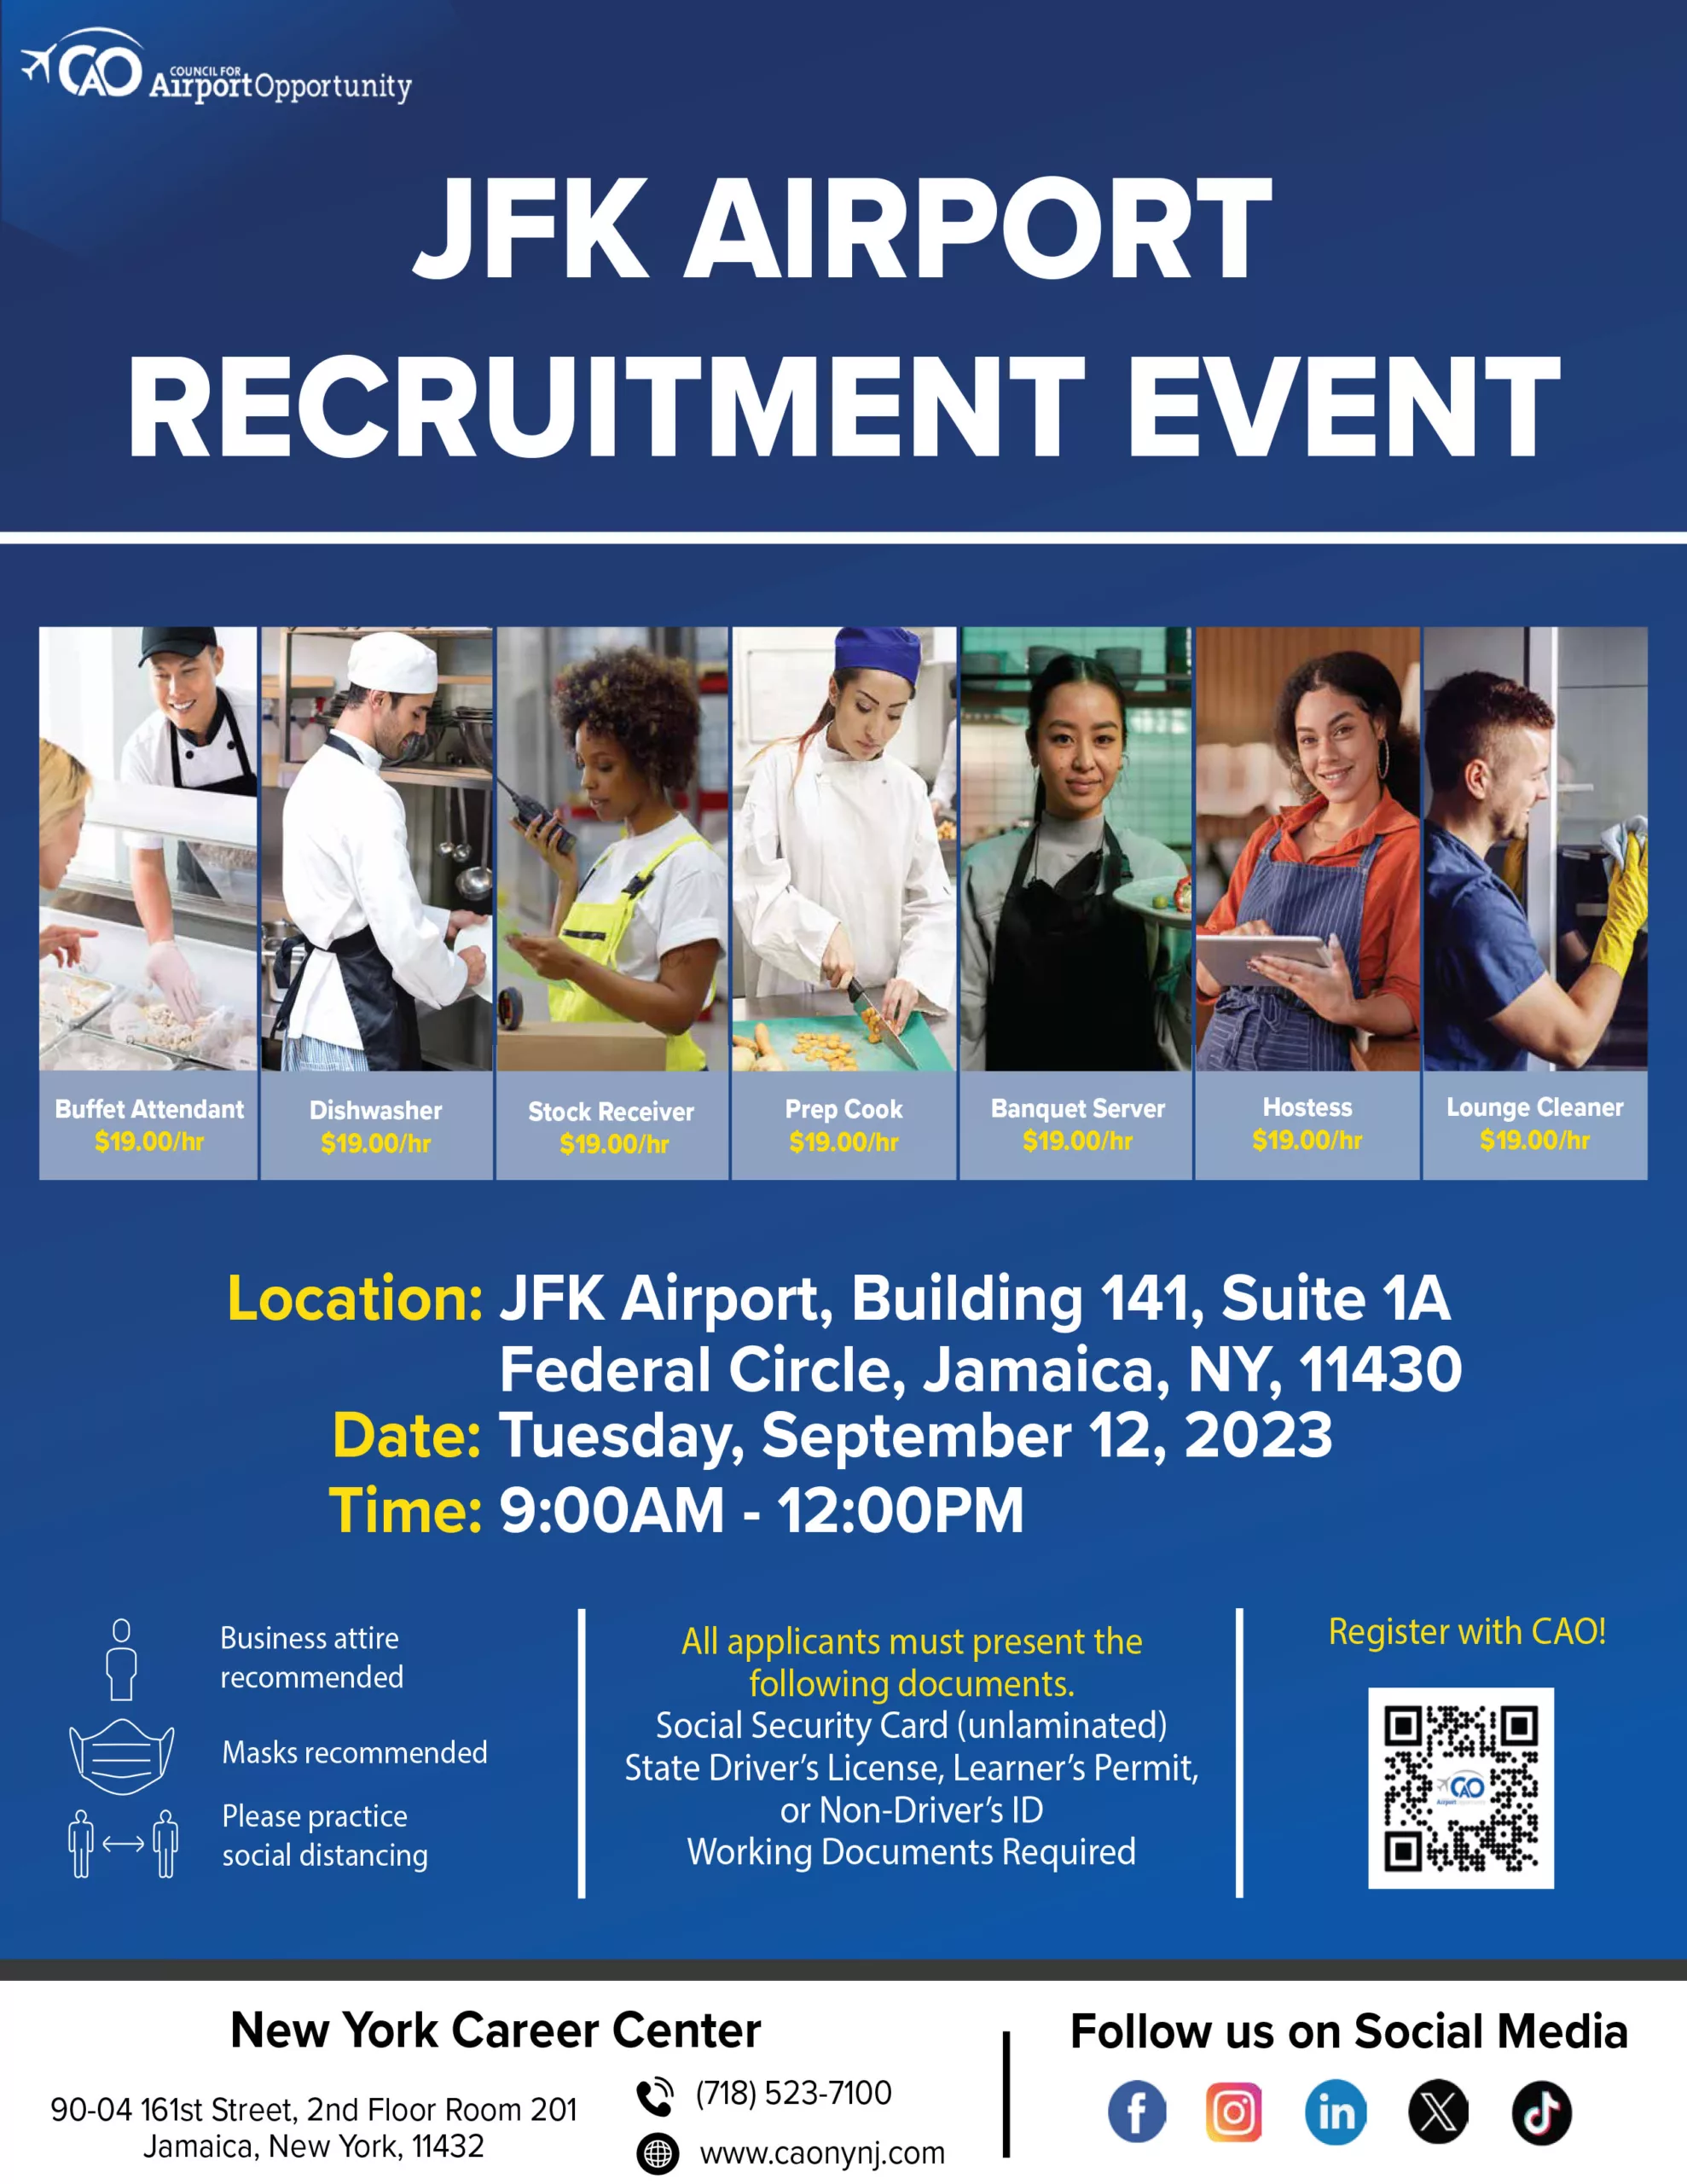 JFK Airport Recruitment Event Council For Airport Opportunity